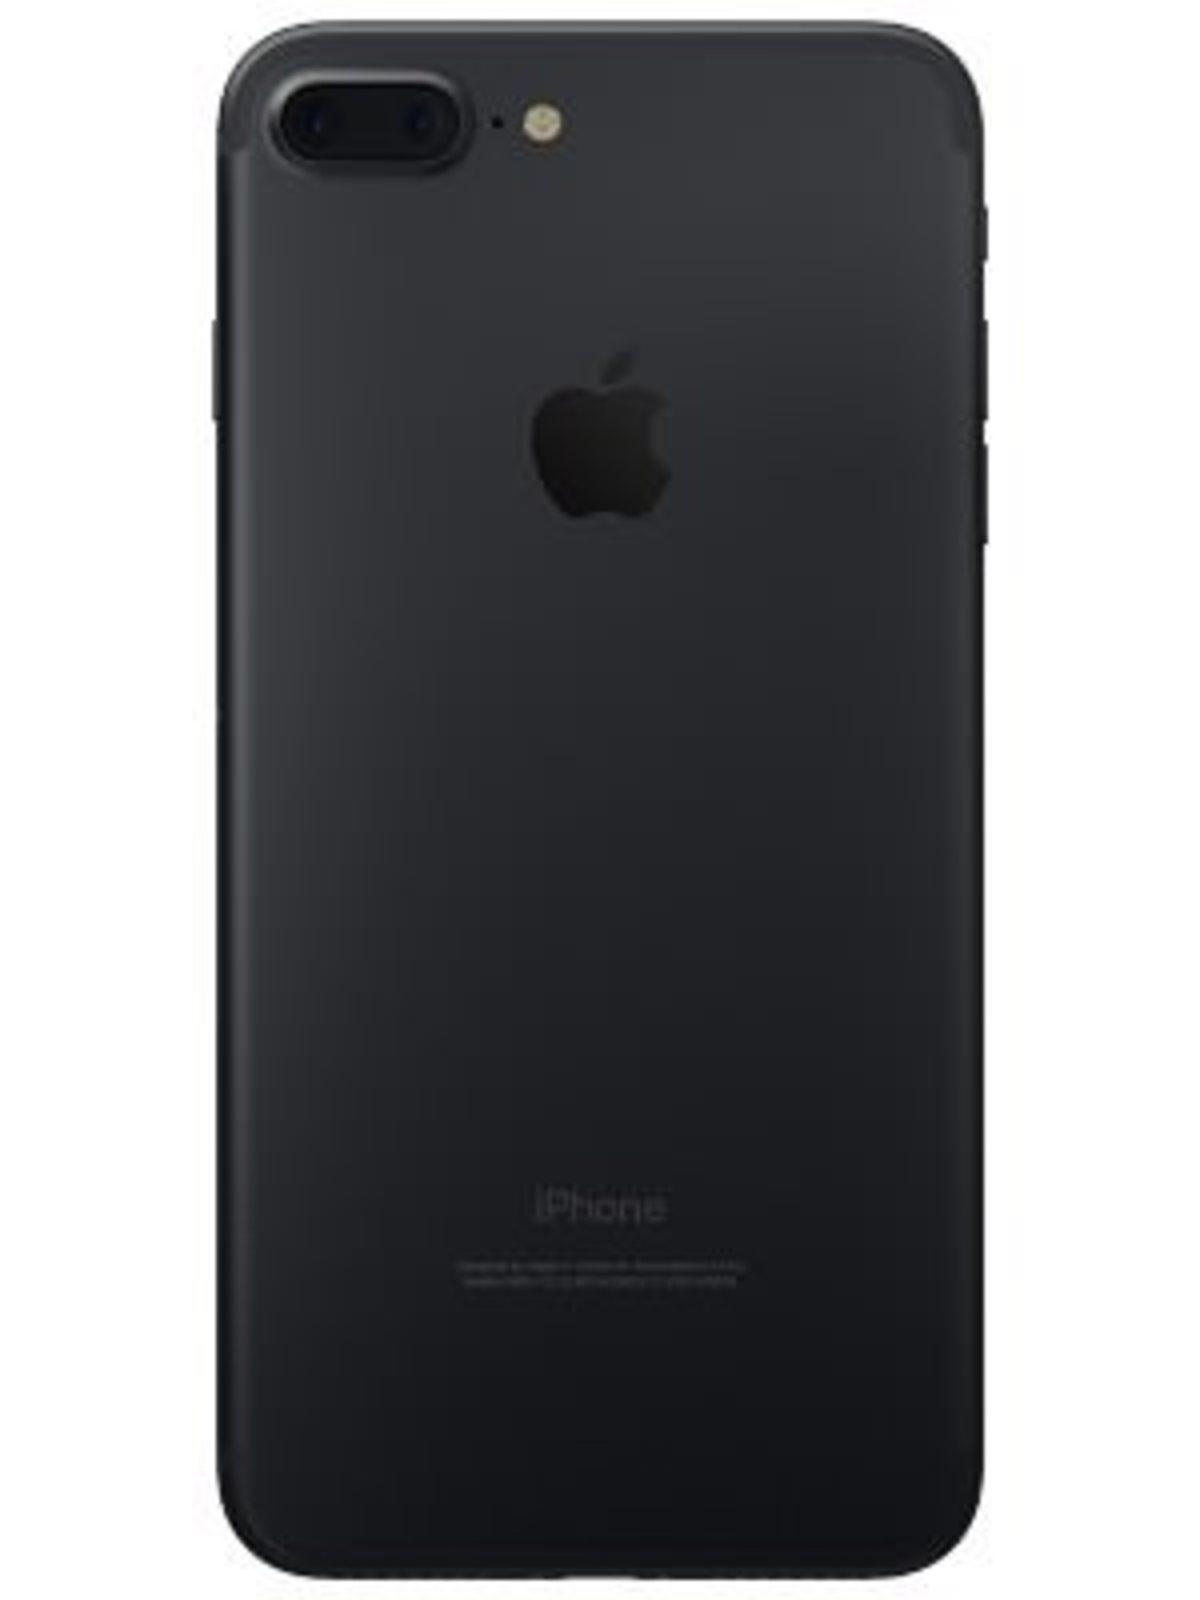 Iphone 7 Plus Price In India, Apple Iphone 7 Plus Reviews, Specifications -  Gadgets Now